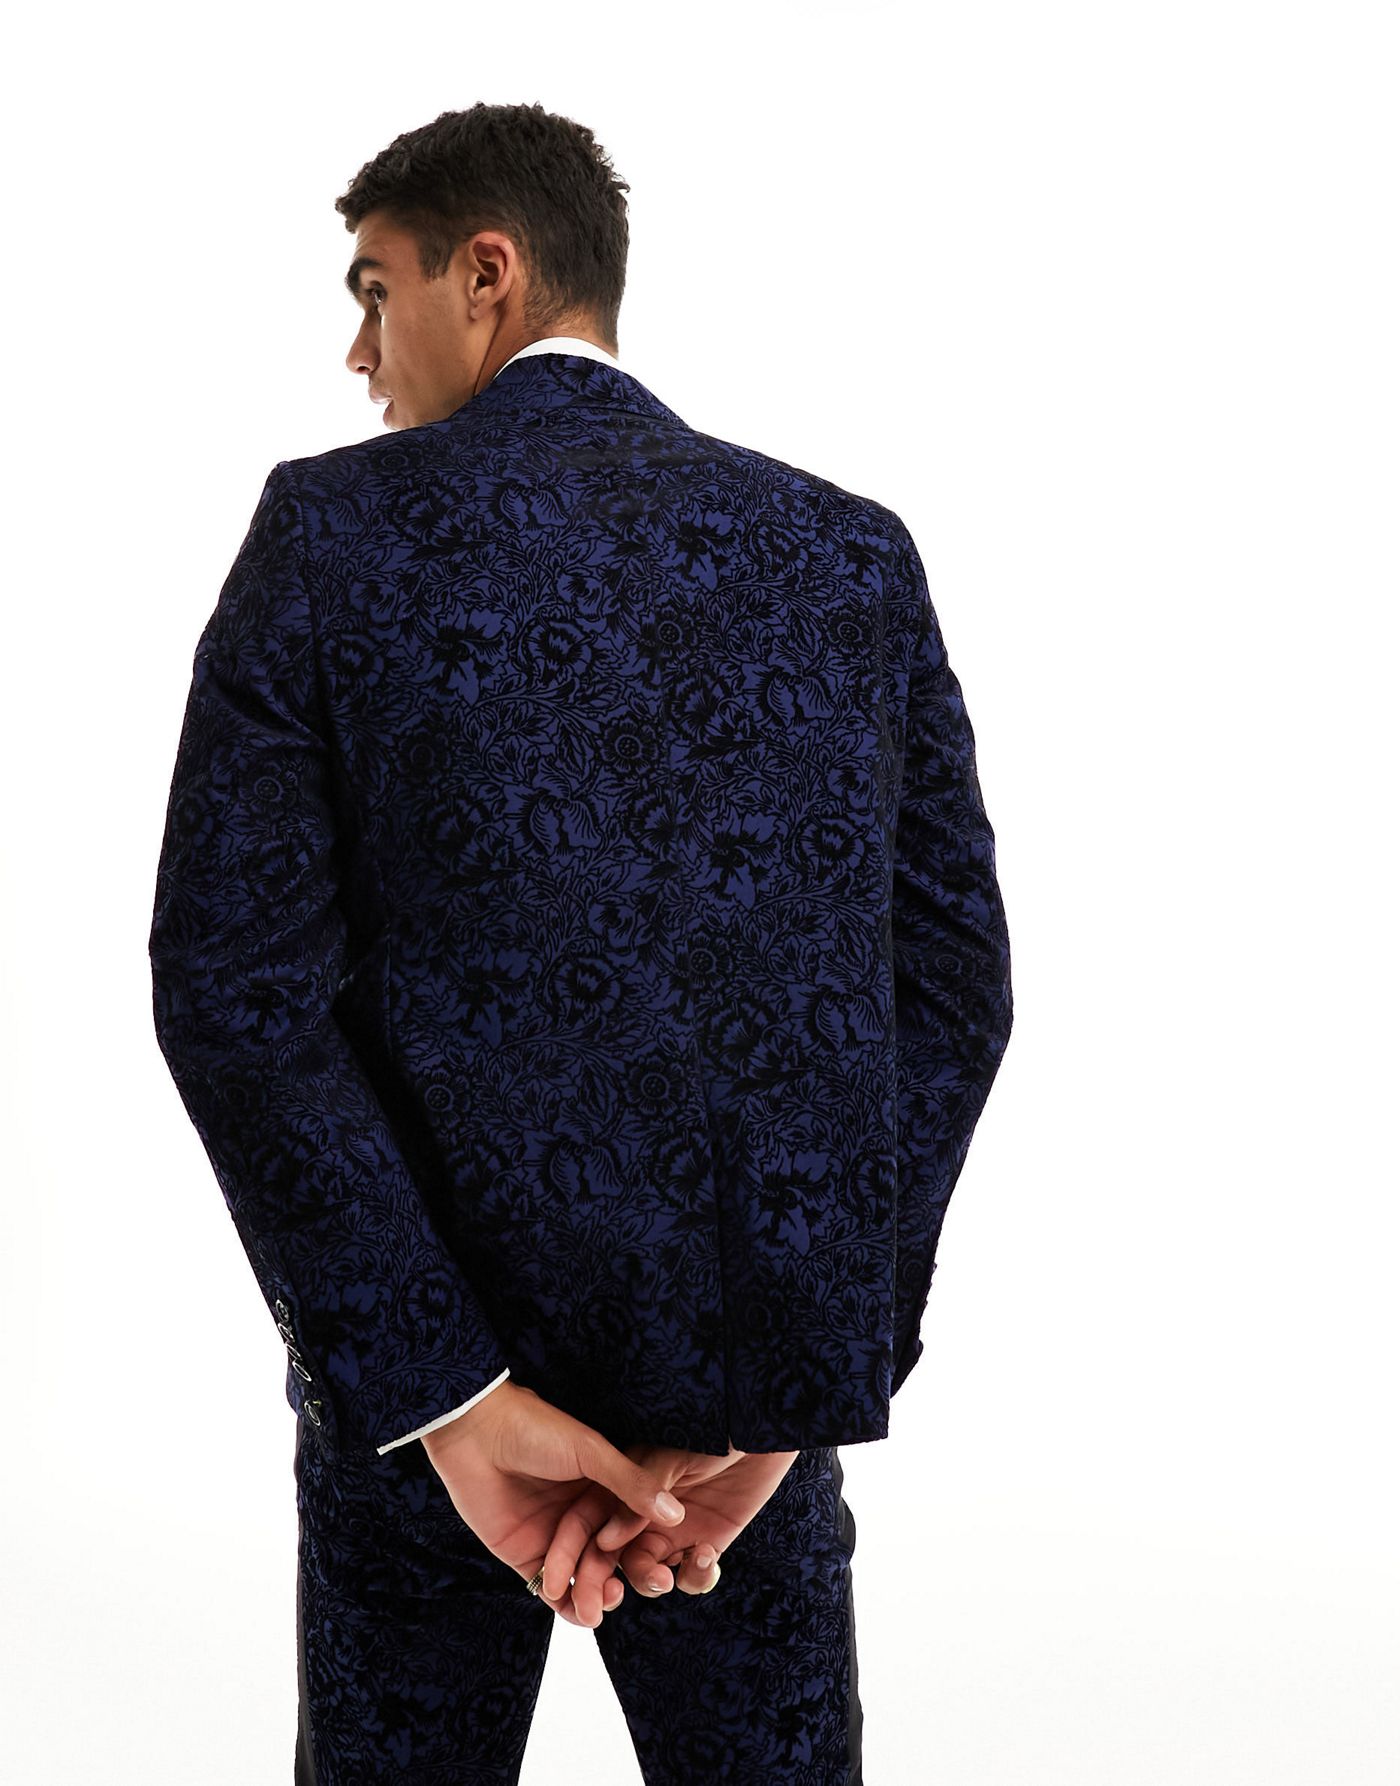 Twisted Tailor arundati suit jacket in navy